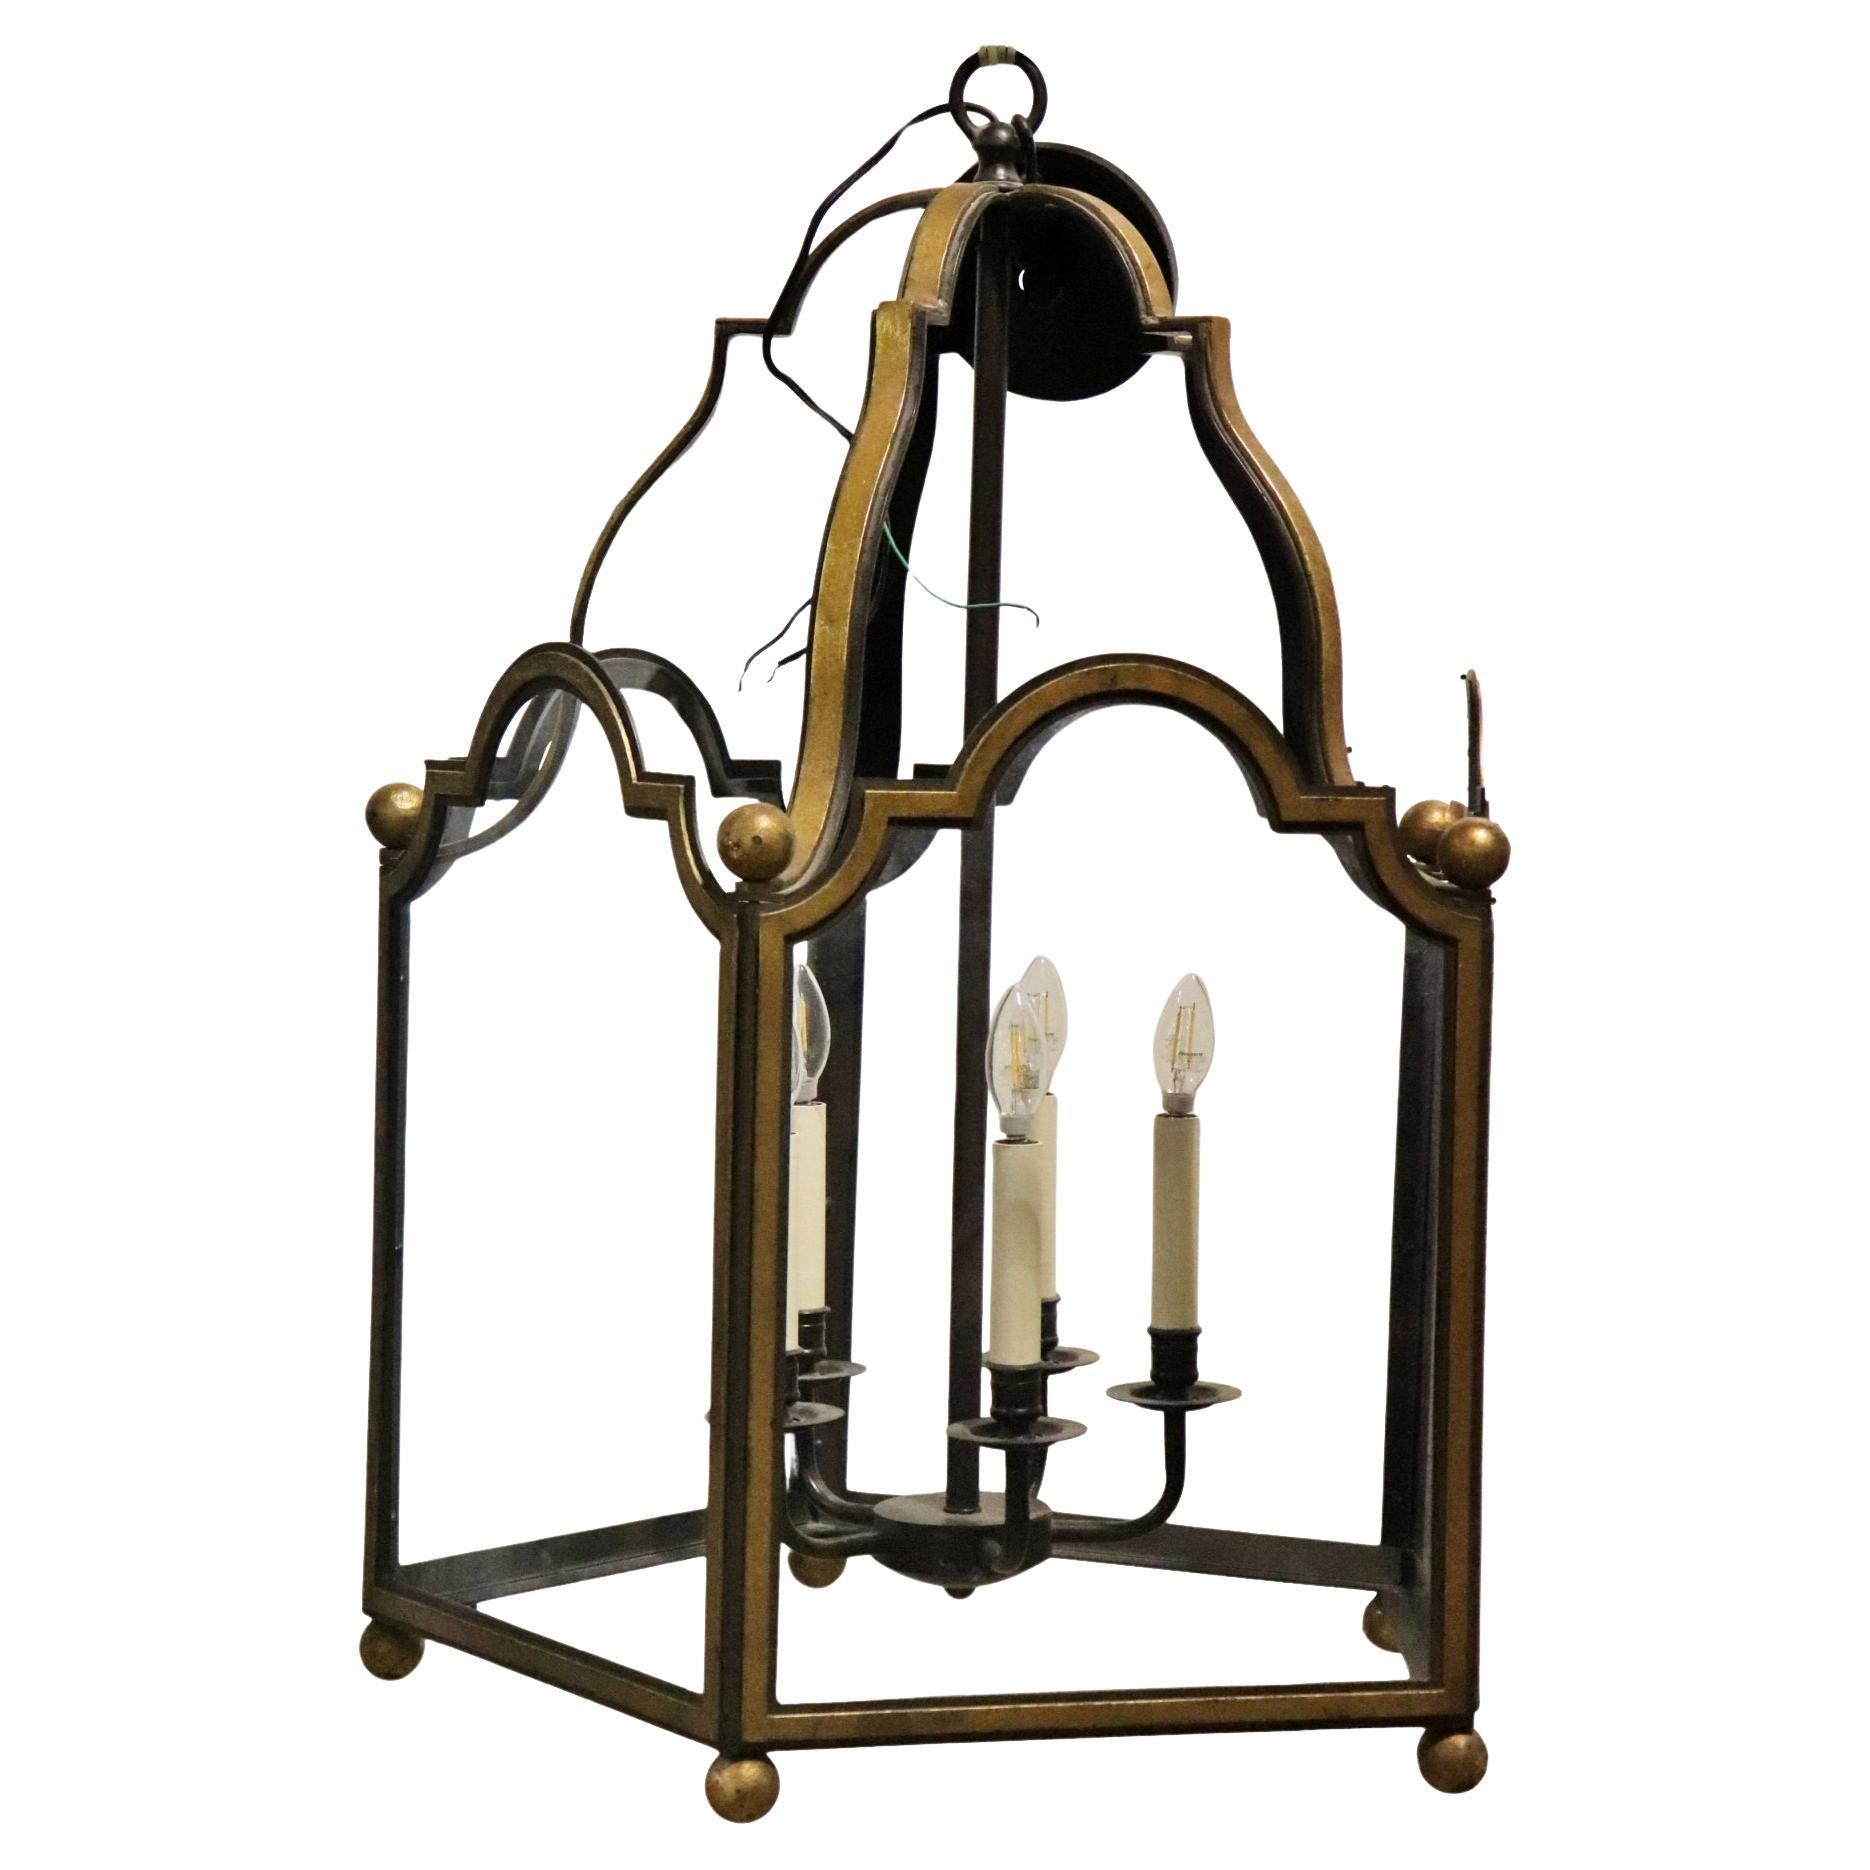 High Quality Wrought Iron 5 Panel 5 Light Glazed Chandelier Lantern For Sale